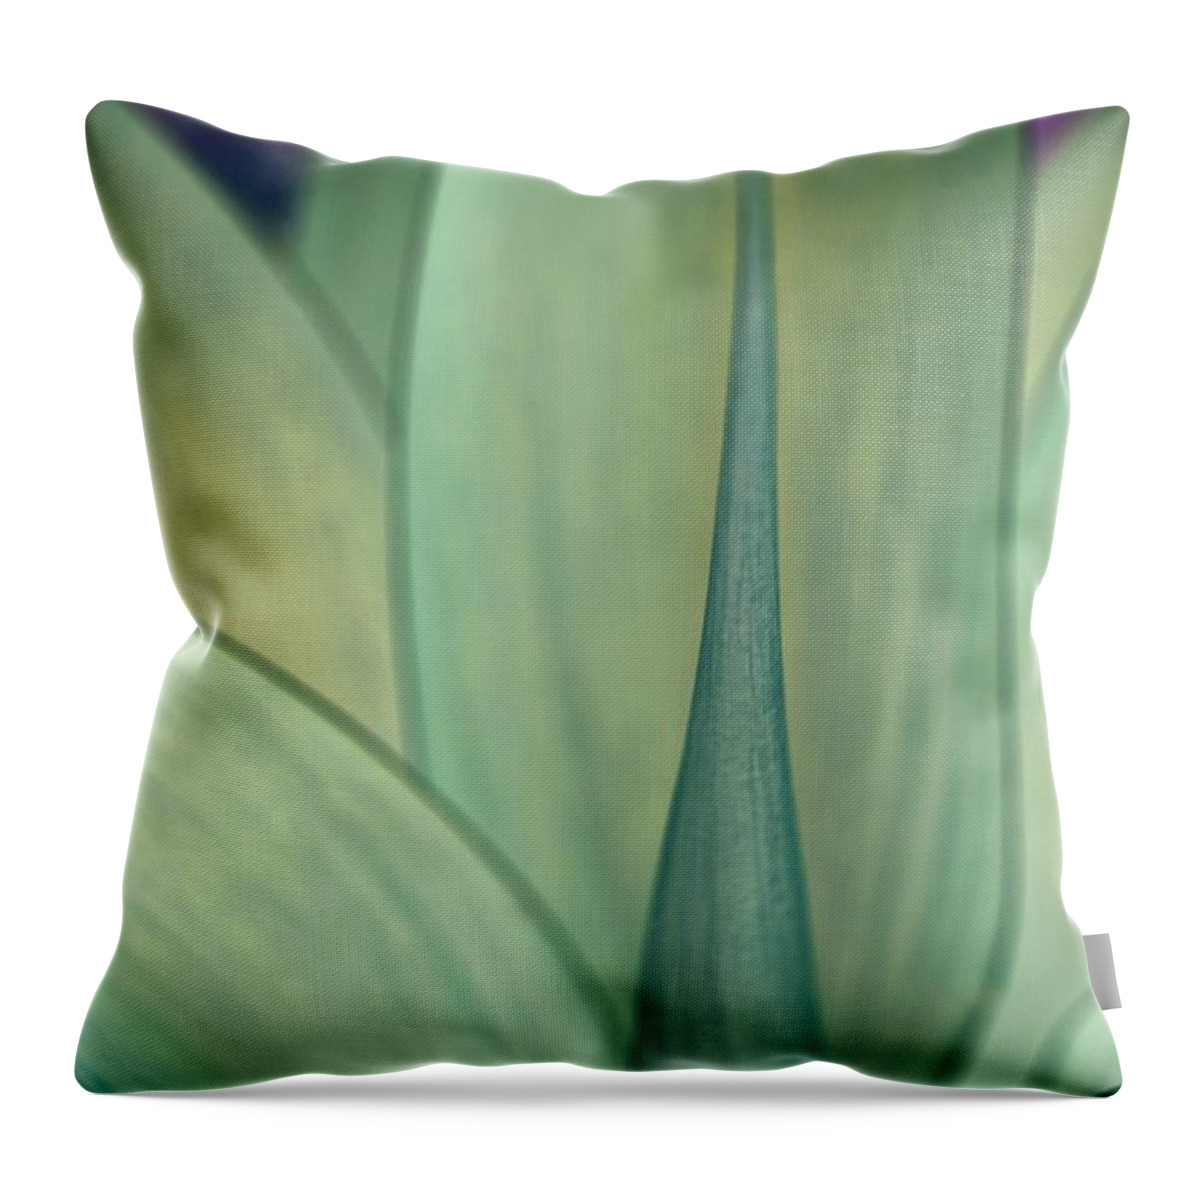 Digitally Altered Flower Photography - Digital Decor Art Designs By Andrew Hewett Of Www.hewettinsite.co.za Throw Pillow featuring the photograph Altered Flower - 155 by Andrew Hewett